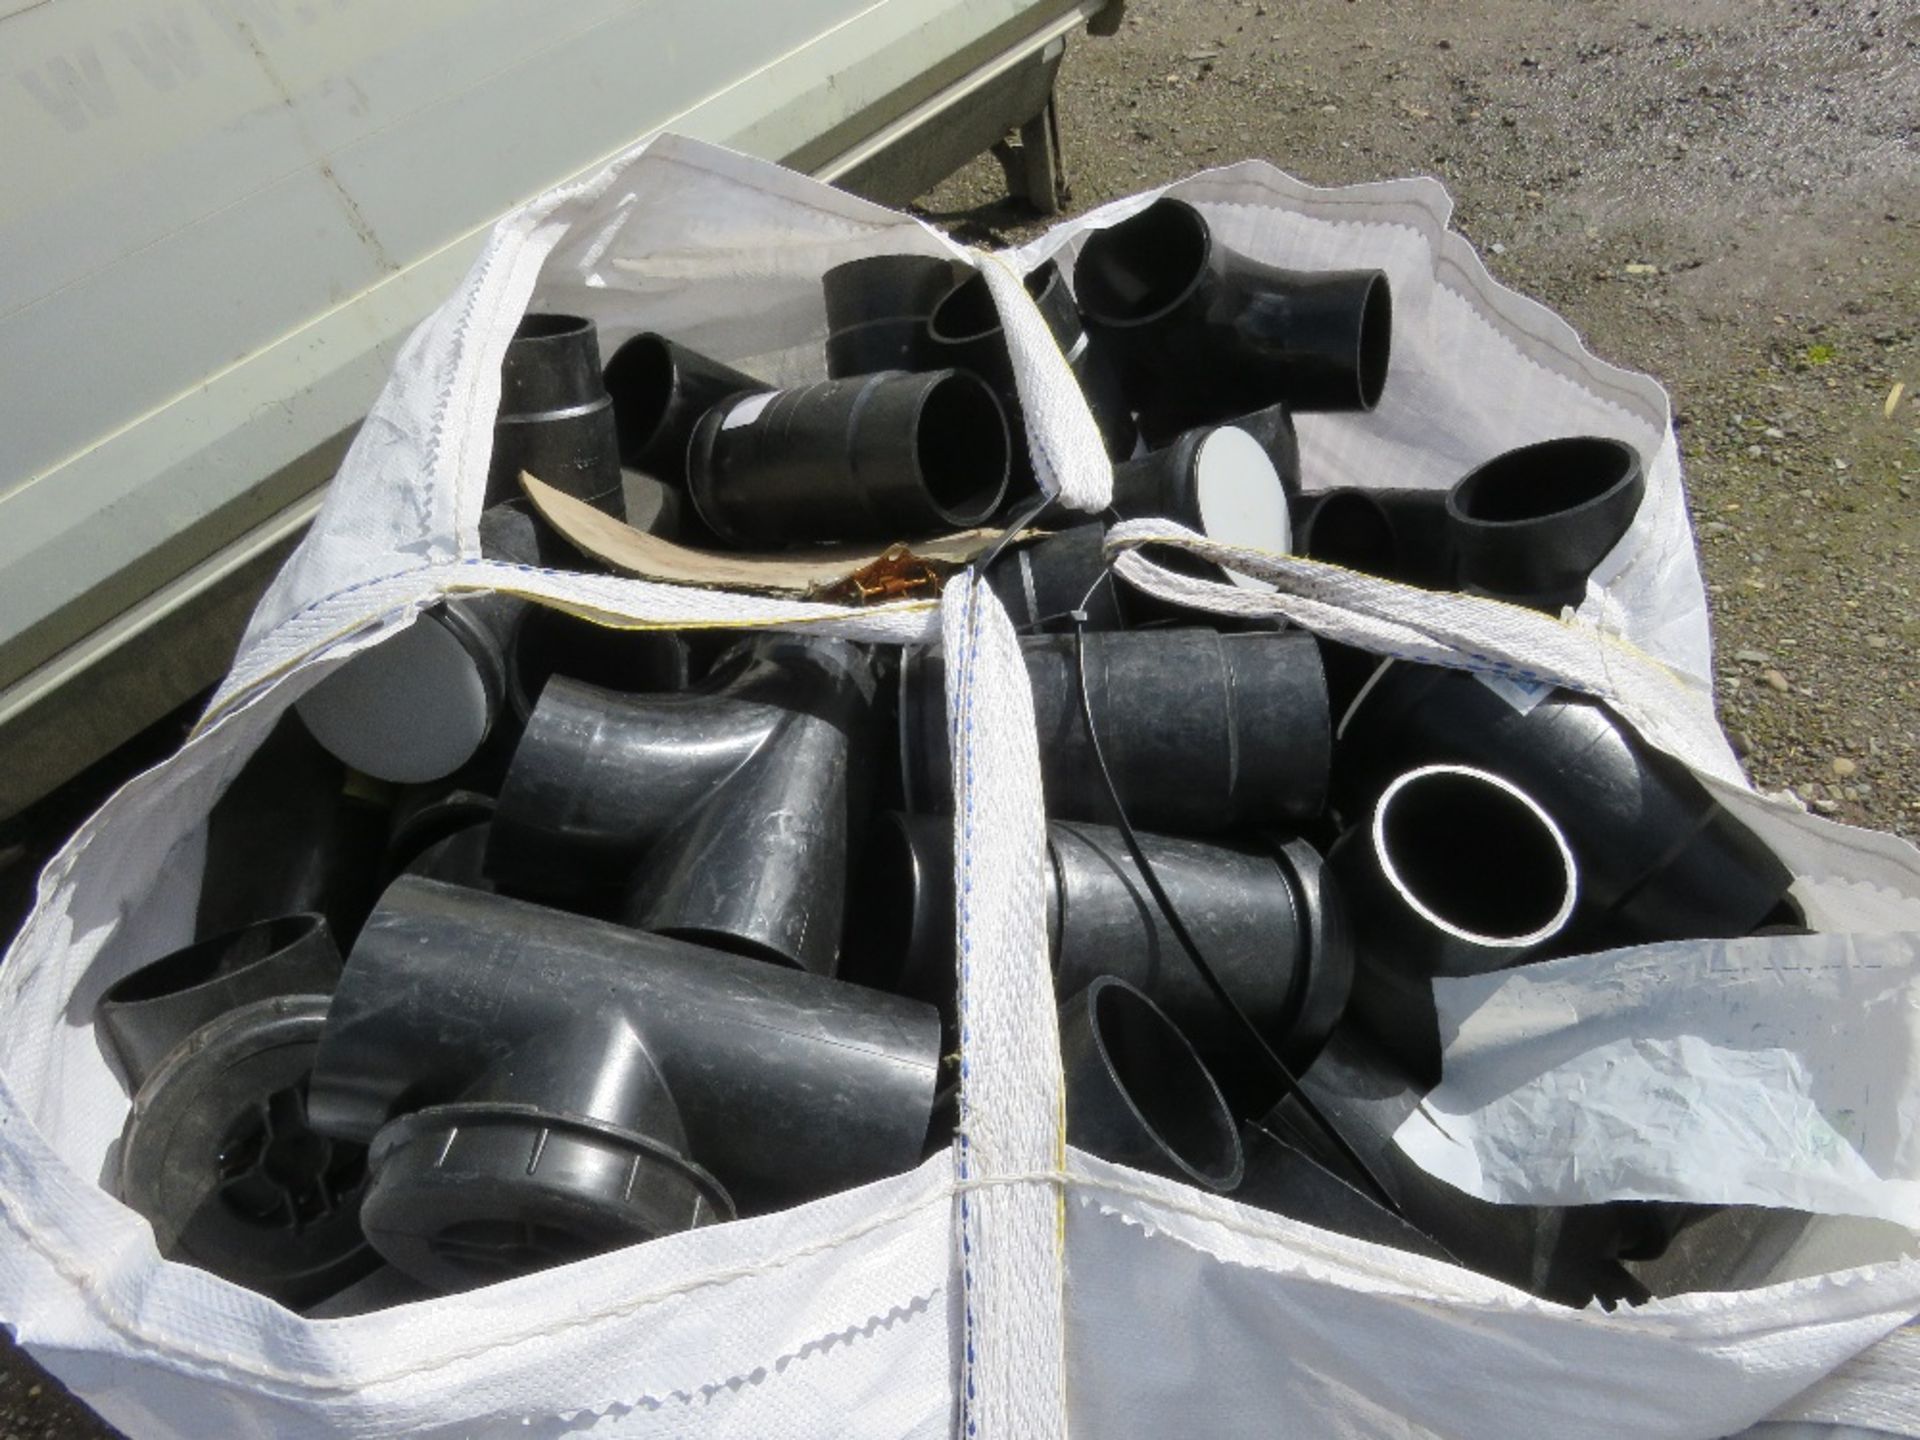 2 X BULK BAGS CONTAINING PLASTIC PIPE JOINTS AND FITTINGS. - Image 3 of 5